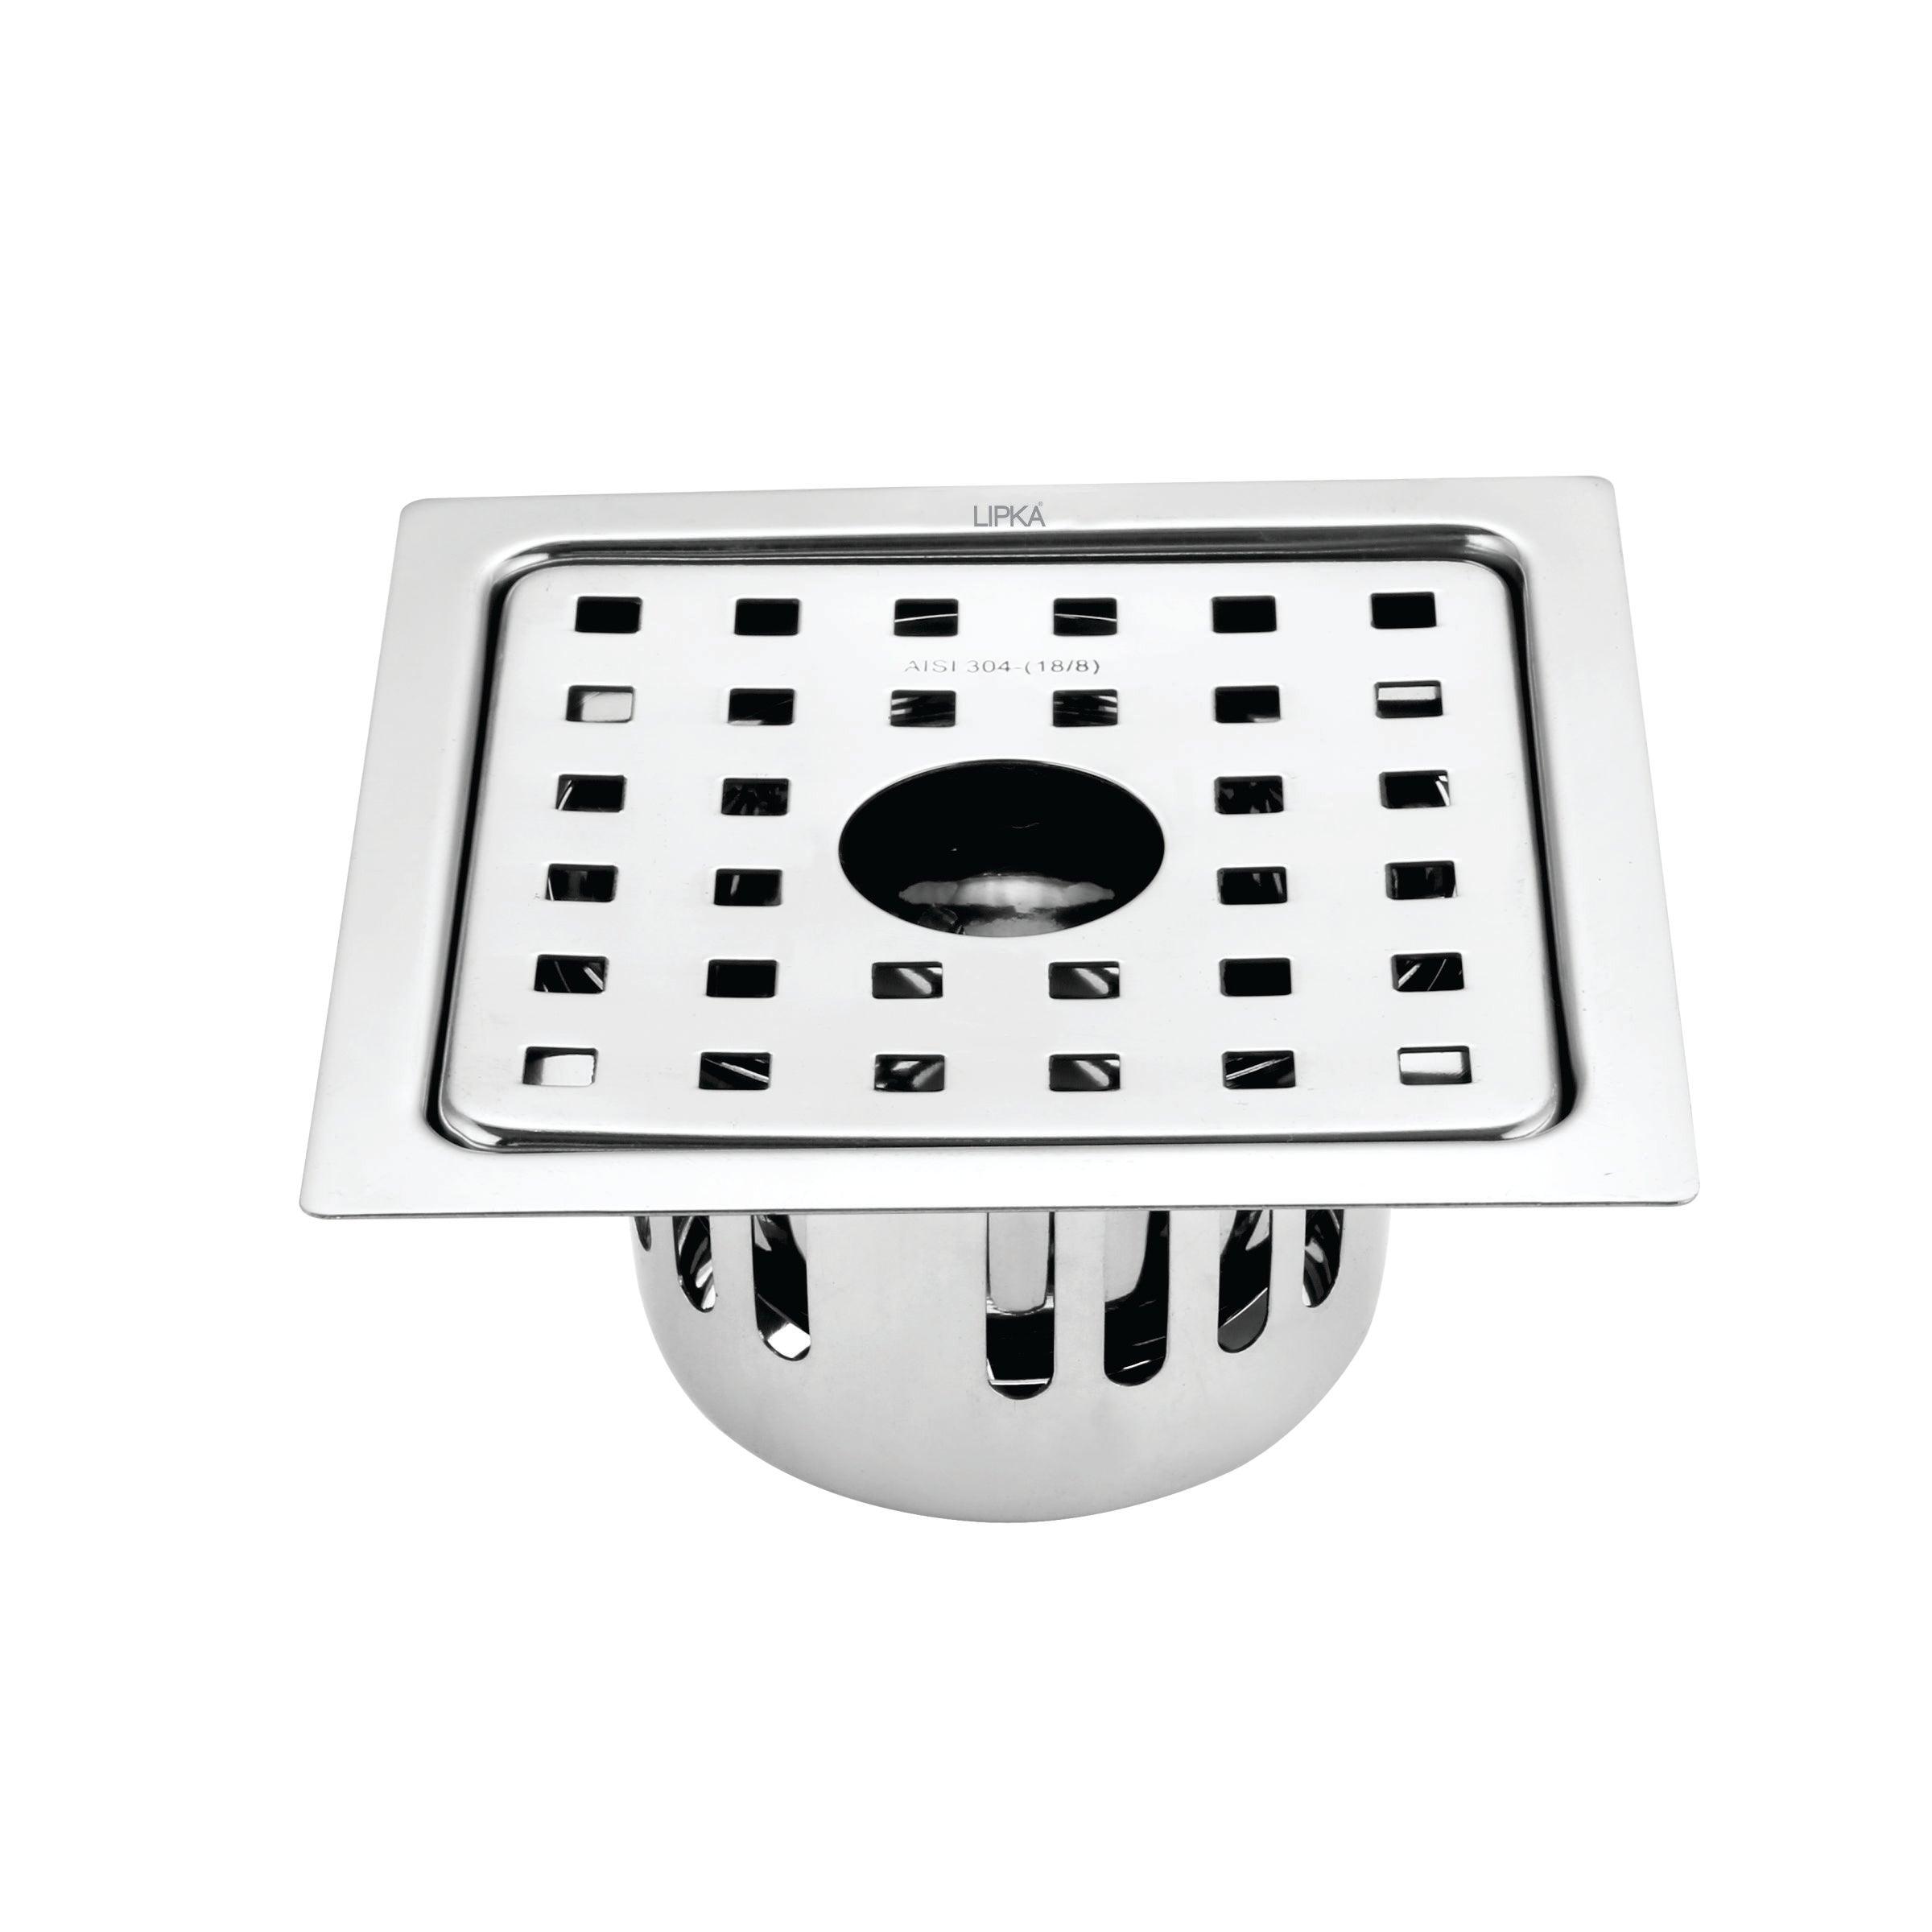 Agni Square Floor Drain (6 x 6 Inches) with Hole and Cockroach Trap